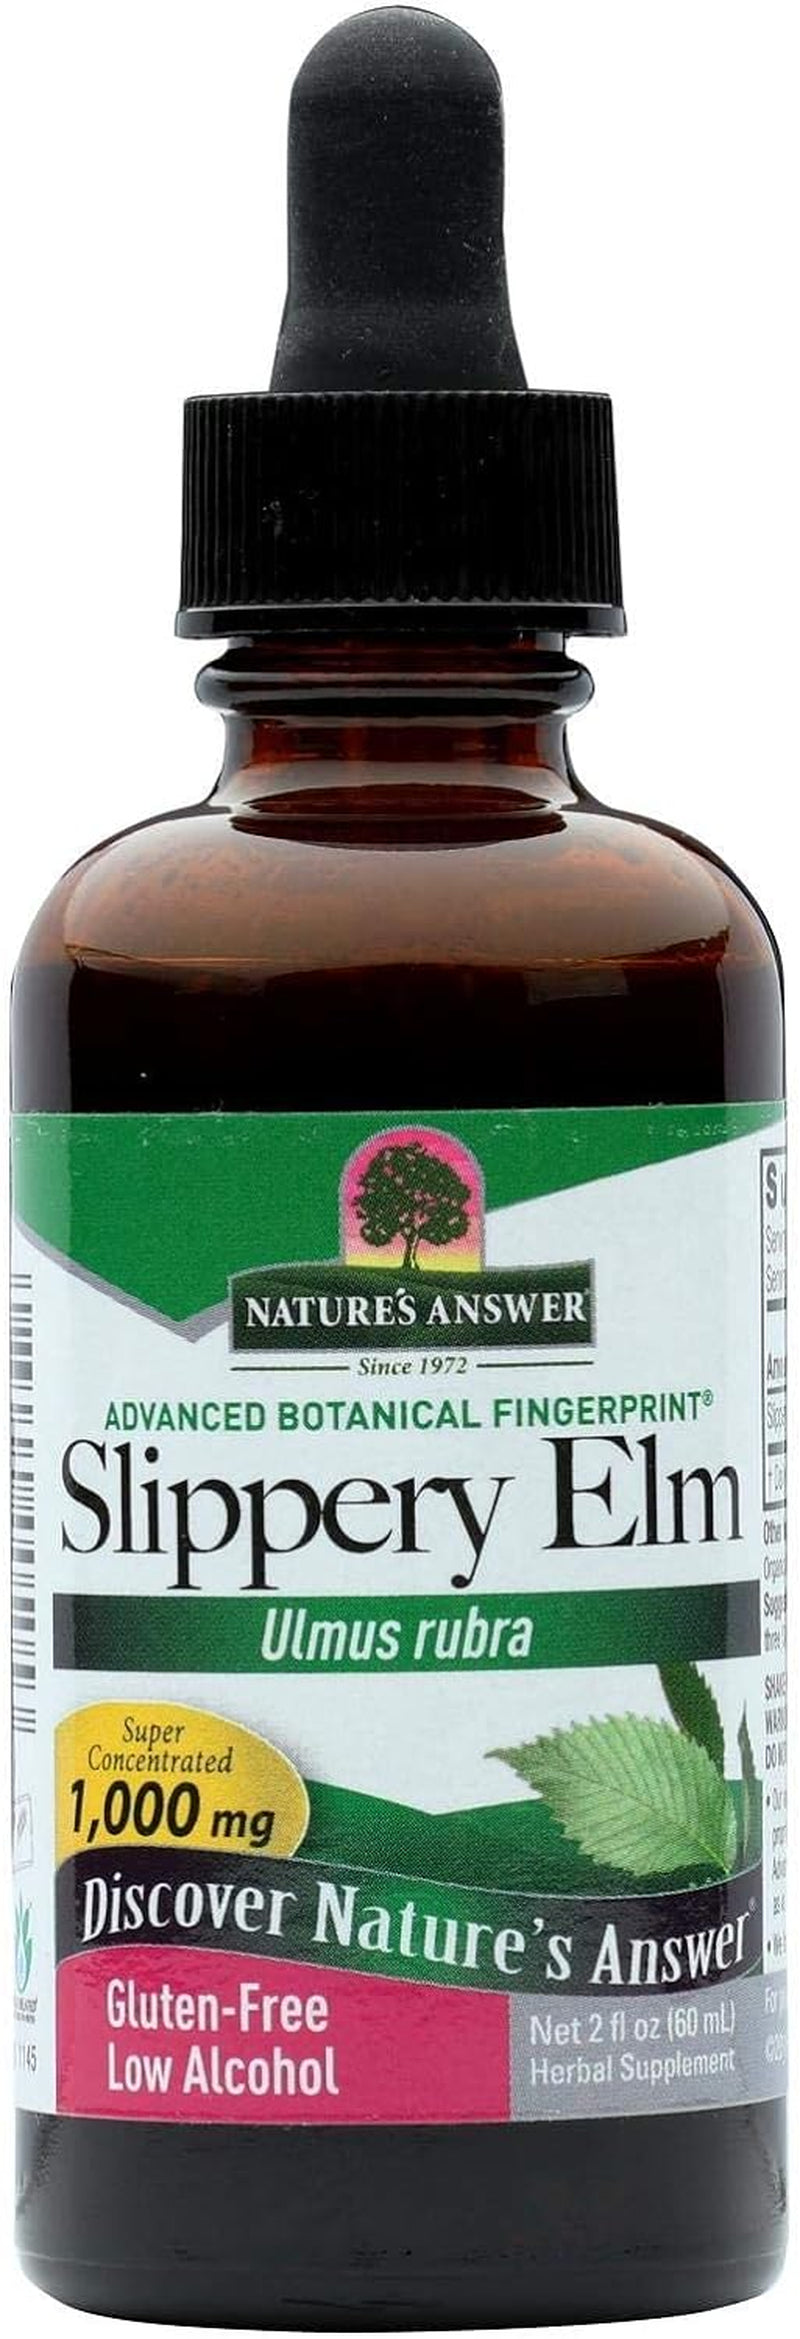 Nature's Answer Slippery Elm Extract - Herbal Support for Mucous Membranes - 2oz, Low-Organic-Alcohol Formula